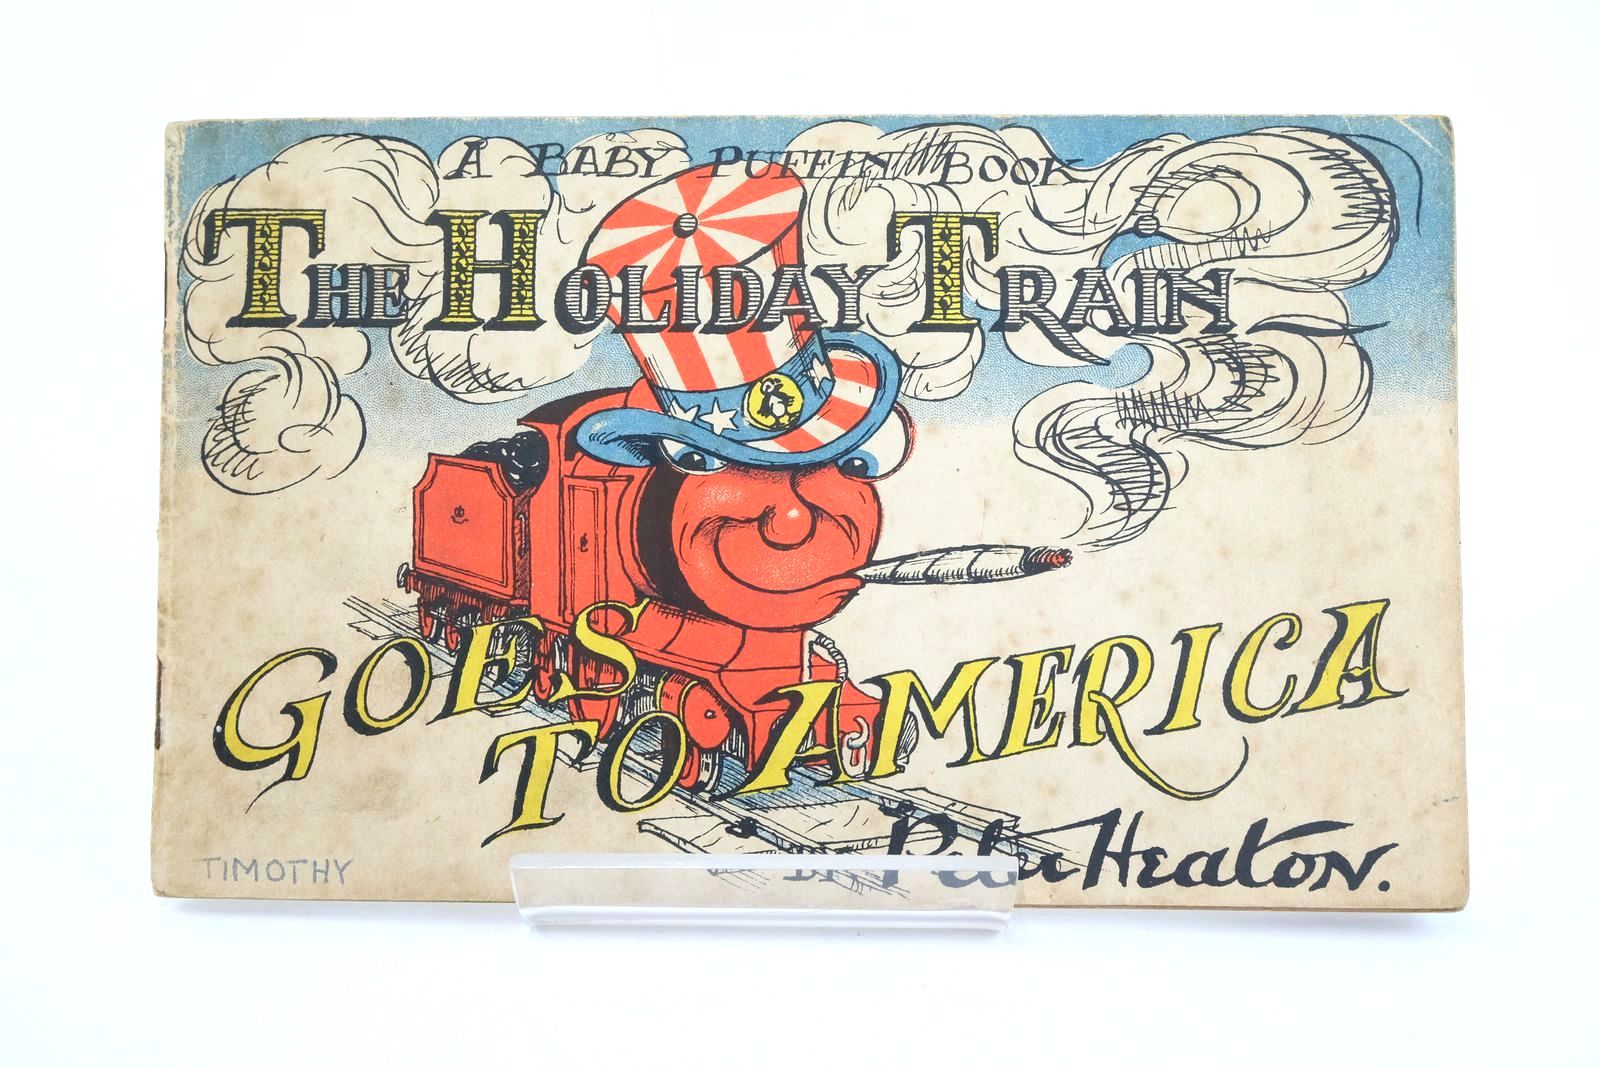 Photo of THE HOLIDAY TRAIN GOES TO AMERICA written by Heaton, Peter illustrated by Heaton, Peter published by Penguin Books Ltd (STOCK CODE: 1323669)  for sale by Stella & Rose's Books